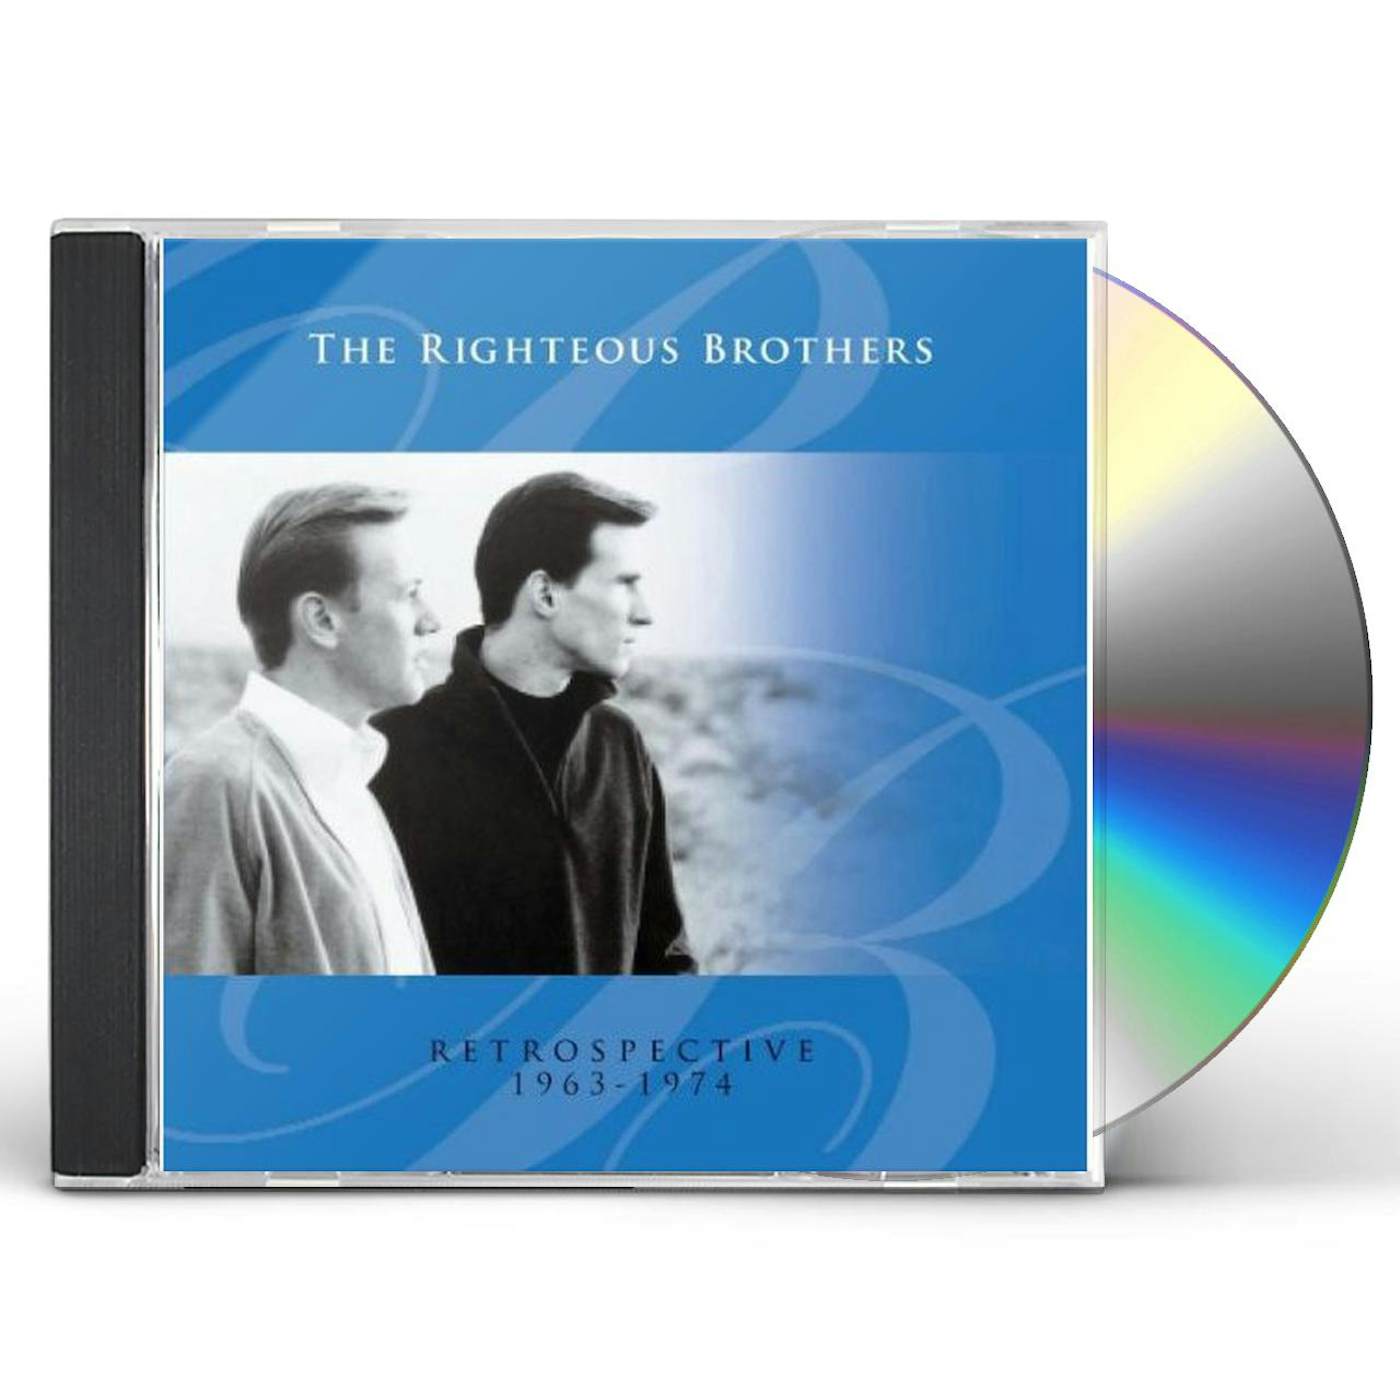 The Righteous Brothers RETROSPECTIVE 1963-1974 CD